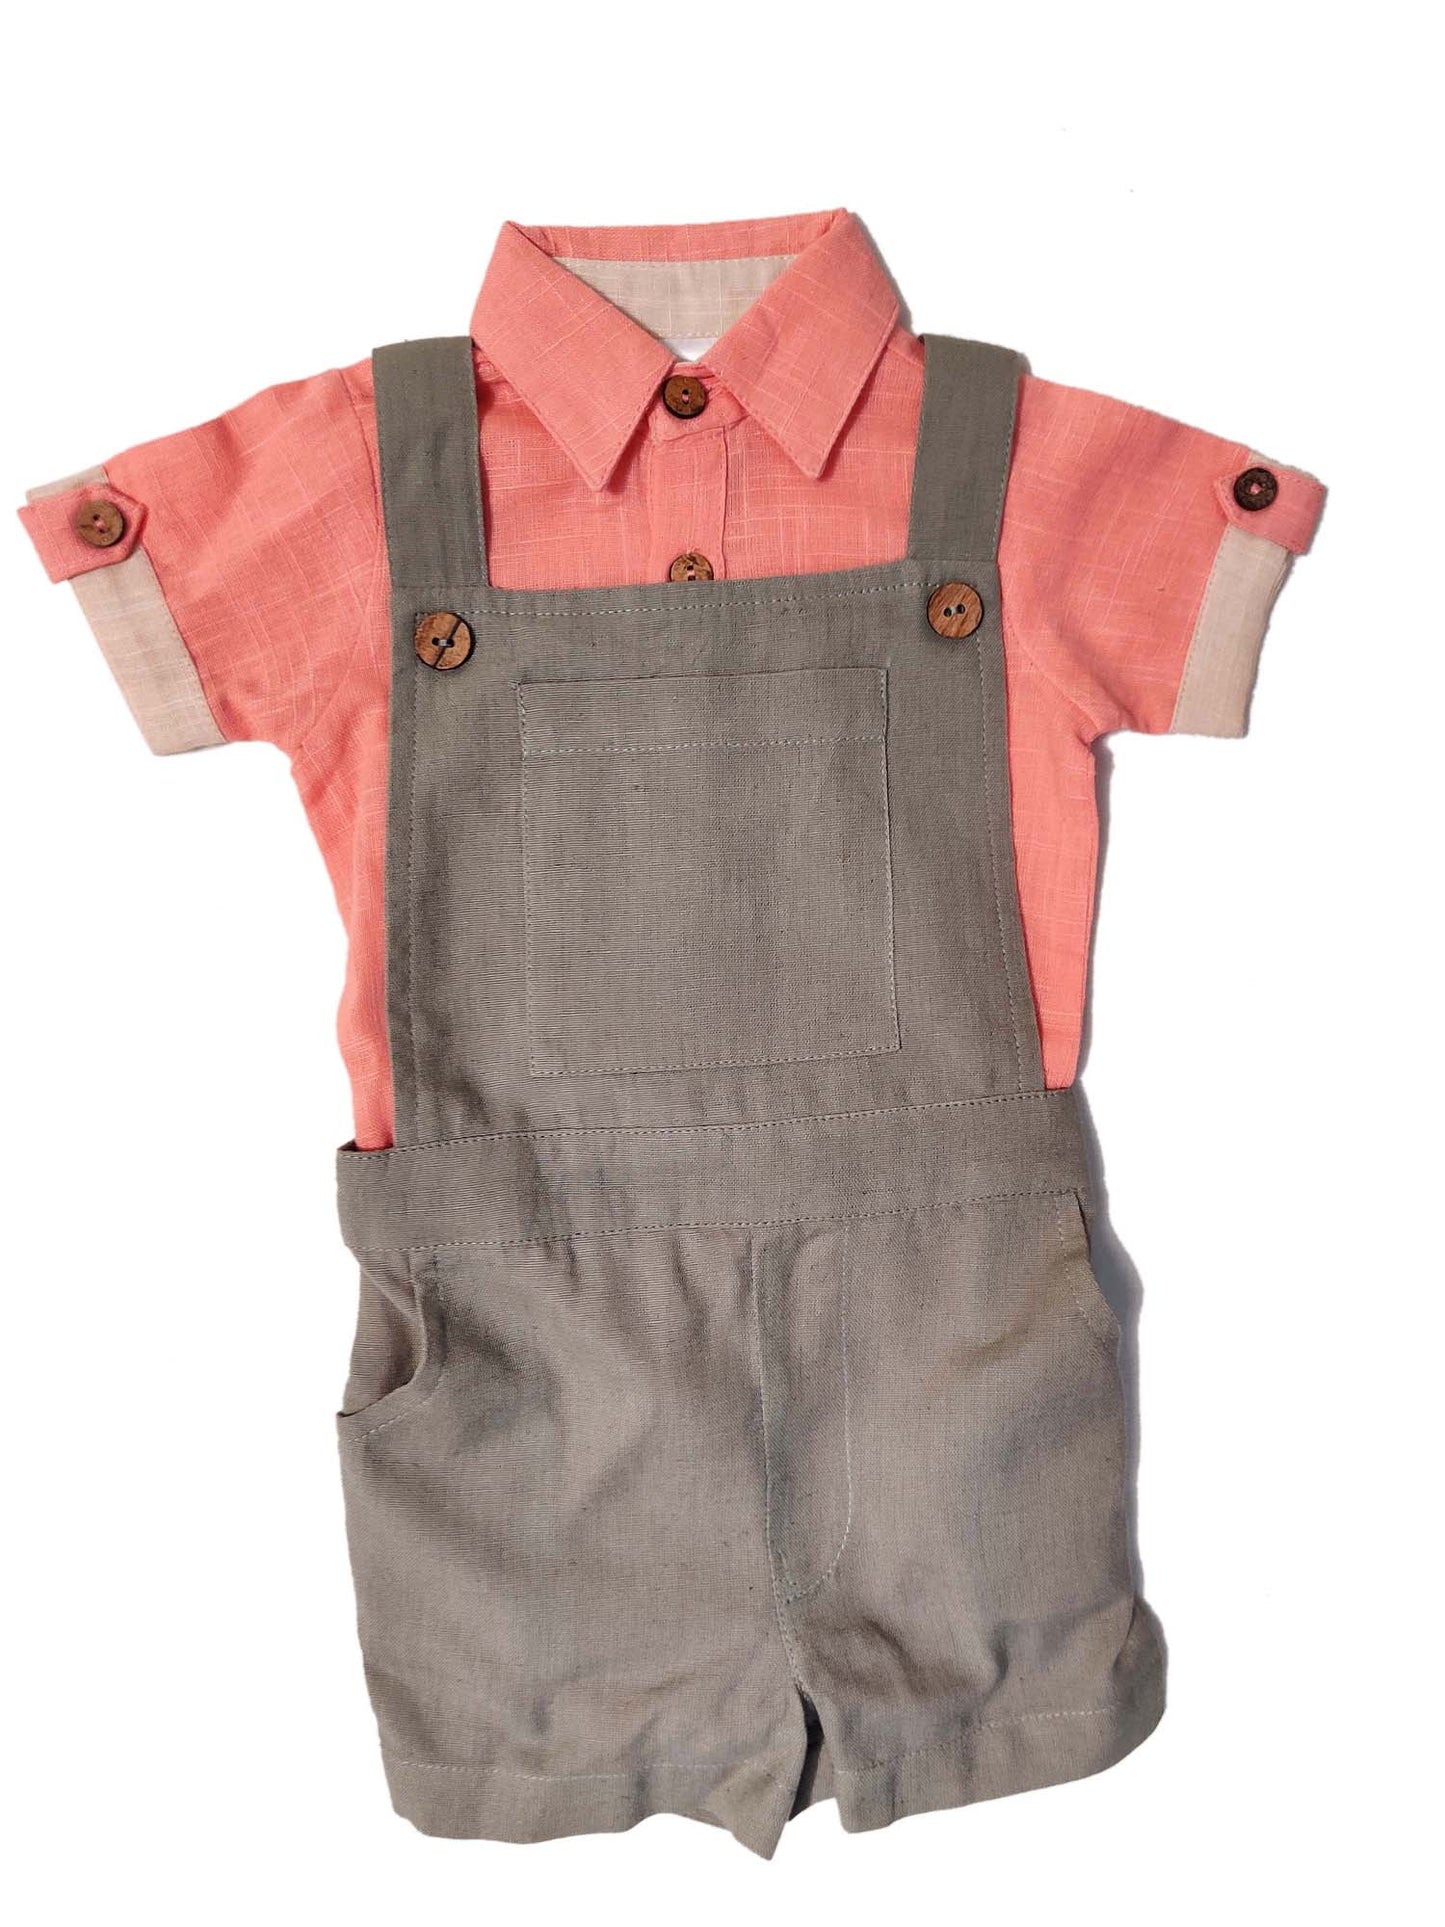 Infant Romper-Shirt and Overalls Set - Coral & Grey